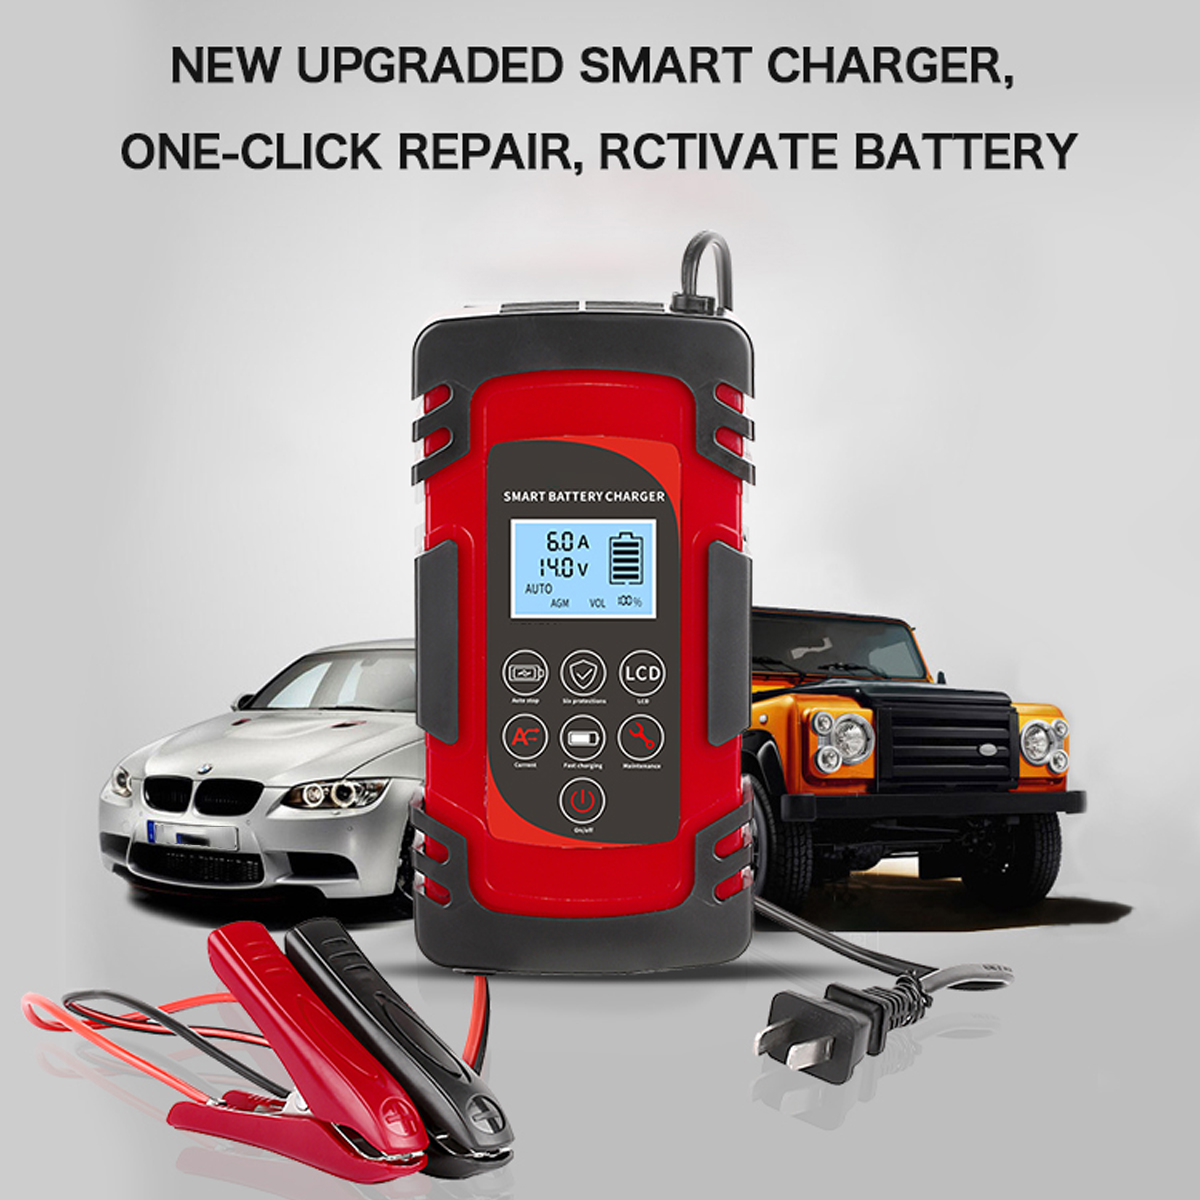 Smart-Automatic-12V24V-8A-Car-Battery-Charger-Motorcycle-Repair-Pulse-Repair-Activation-1855796-8